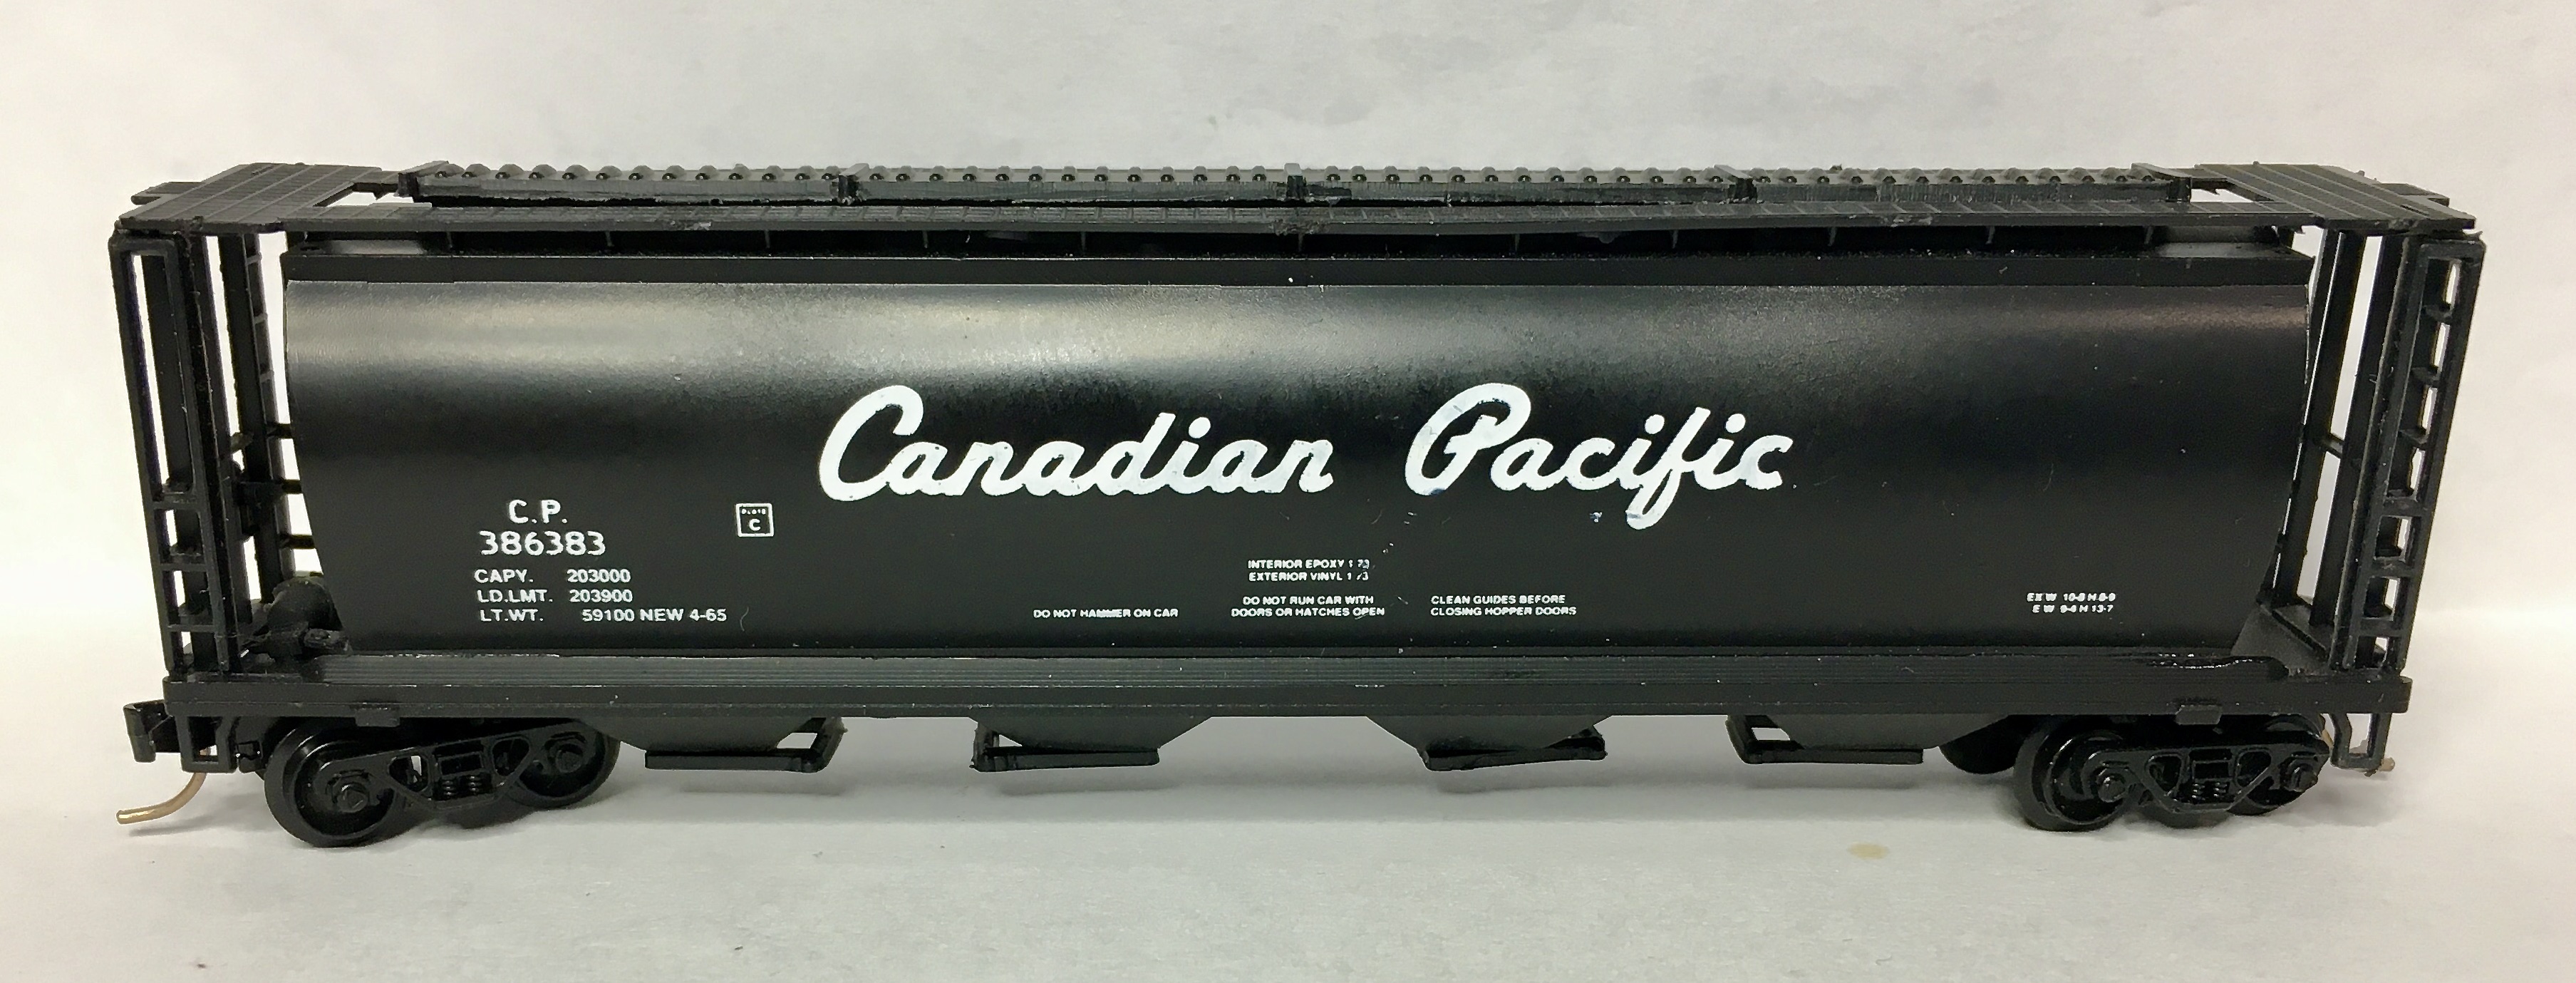 N Scale - CS Models - 7101 - Covered Hopper, 4-Bay, Cylindrical - Canadian Pacific - 387383